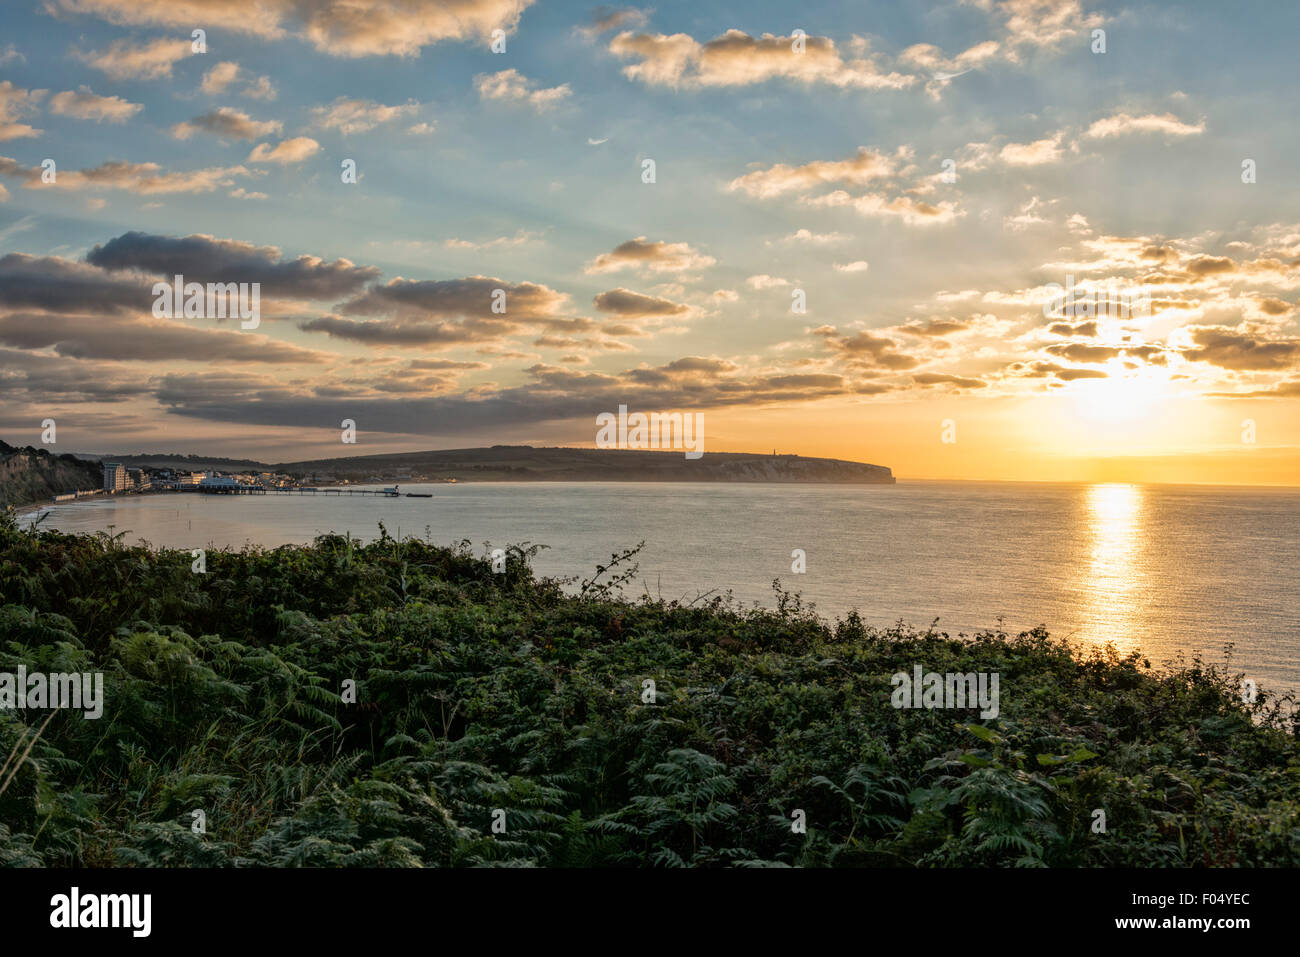 Isle of Wight, 7th August 2015. A beautiful sunrise at Sandown, looking across the Solent. The forecast is for a sunny day across much of the UK with warmer weather over the coming weekend after the recent cool spell. Credit Julian Eales/Alamy Live News Stock Photo